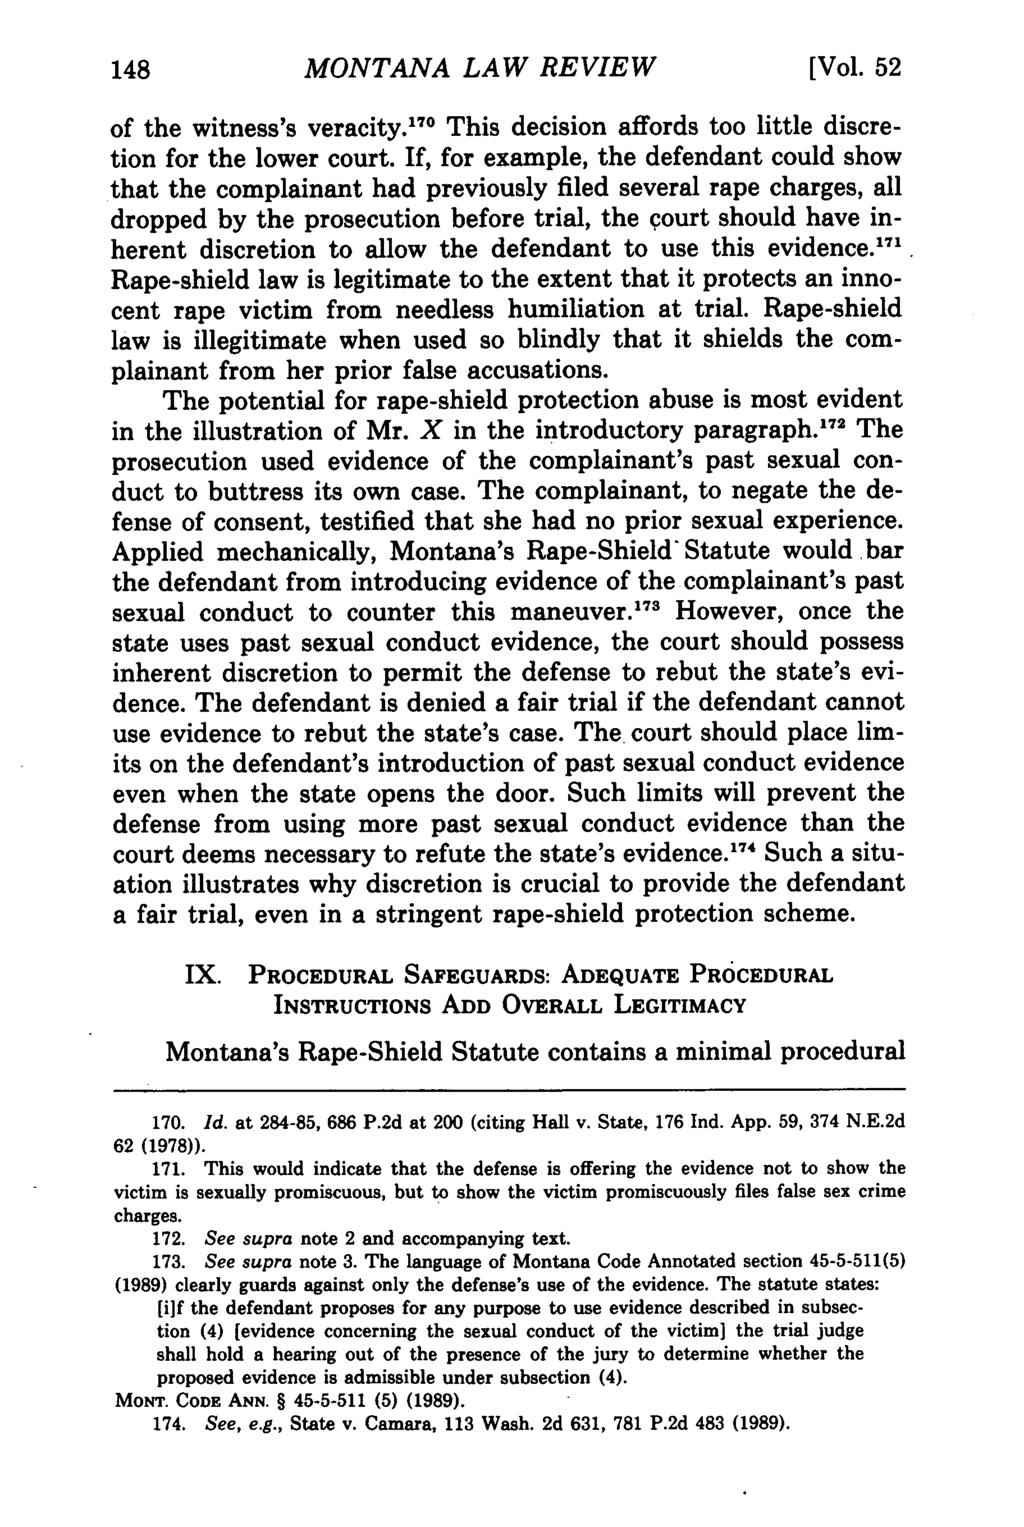 148 Montana Law Review, Vol. 52 [1991], Iss. 1, Art. 8 MONTANA LAW REVIEW [Vol. 52 of the witness's veracity. 1 7 0 This decision affords too little discretion for the lower court.